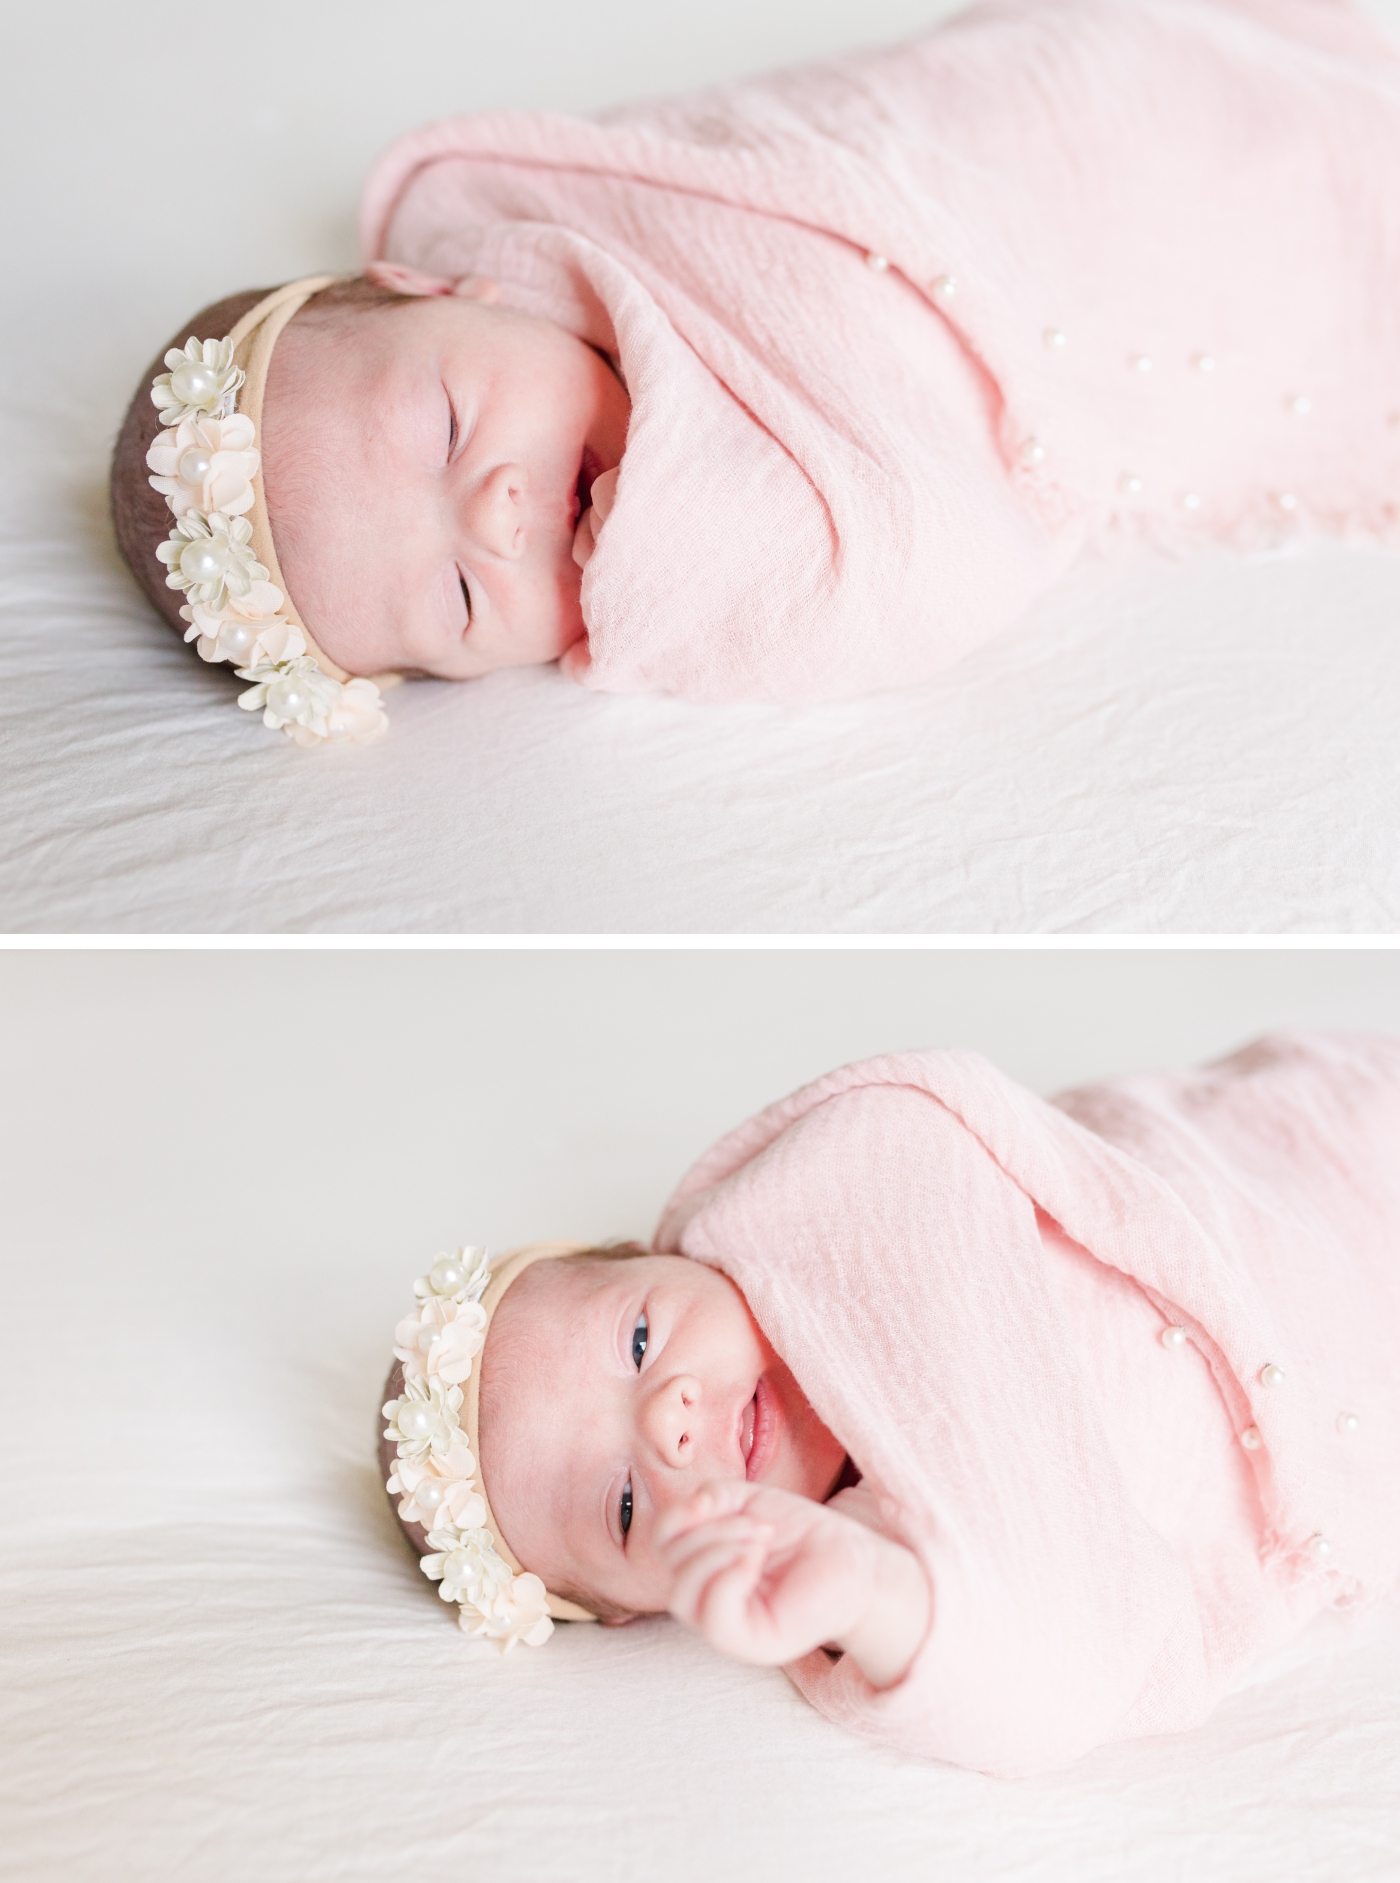 A sweet In-Home Newborn Session in West Virginia